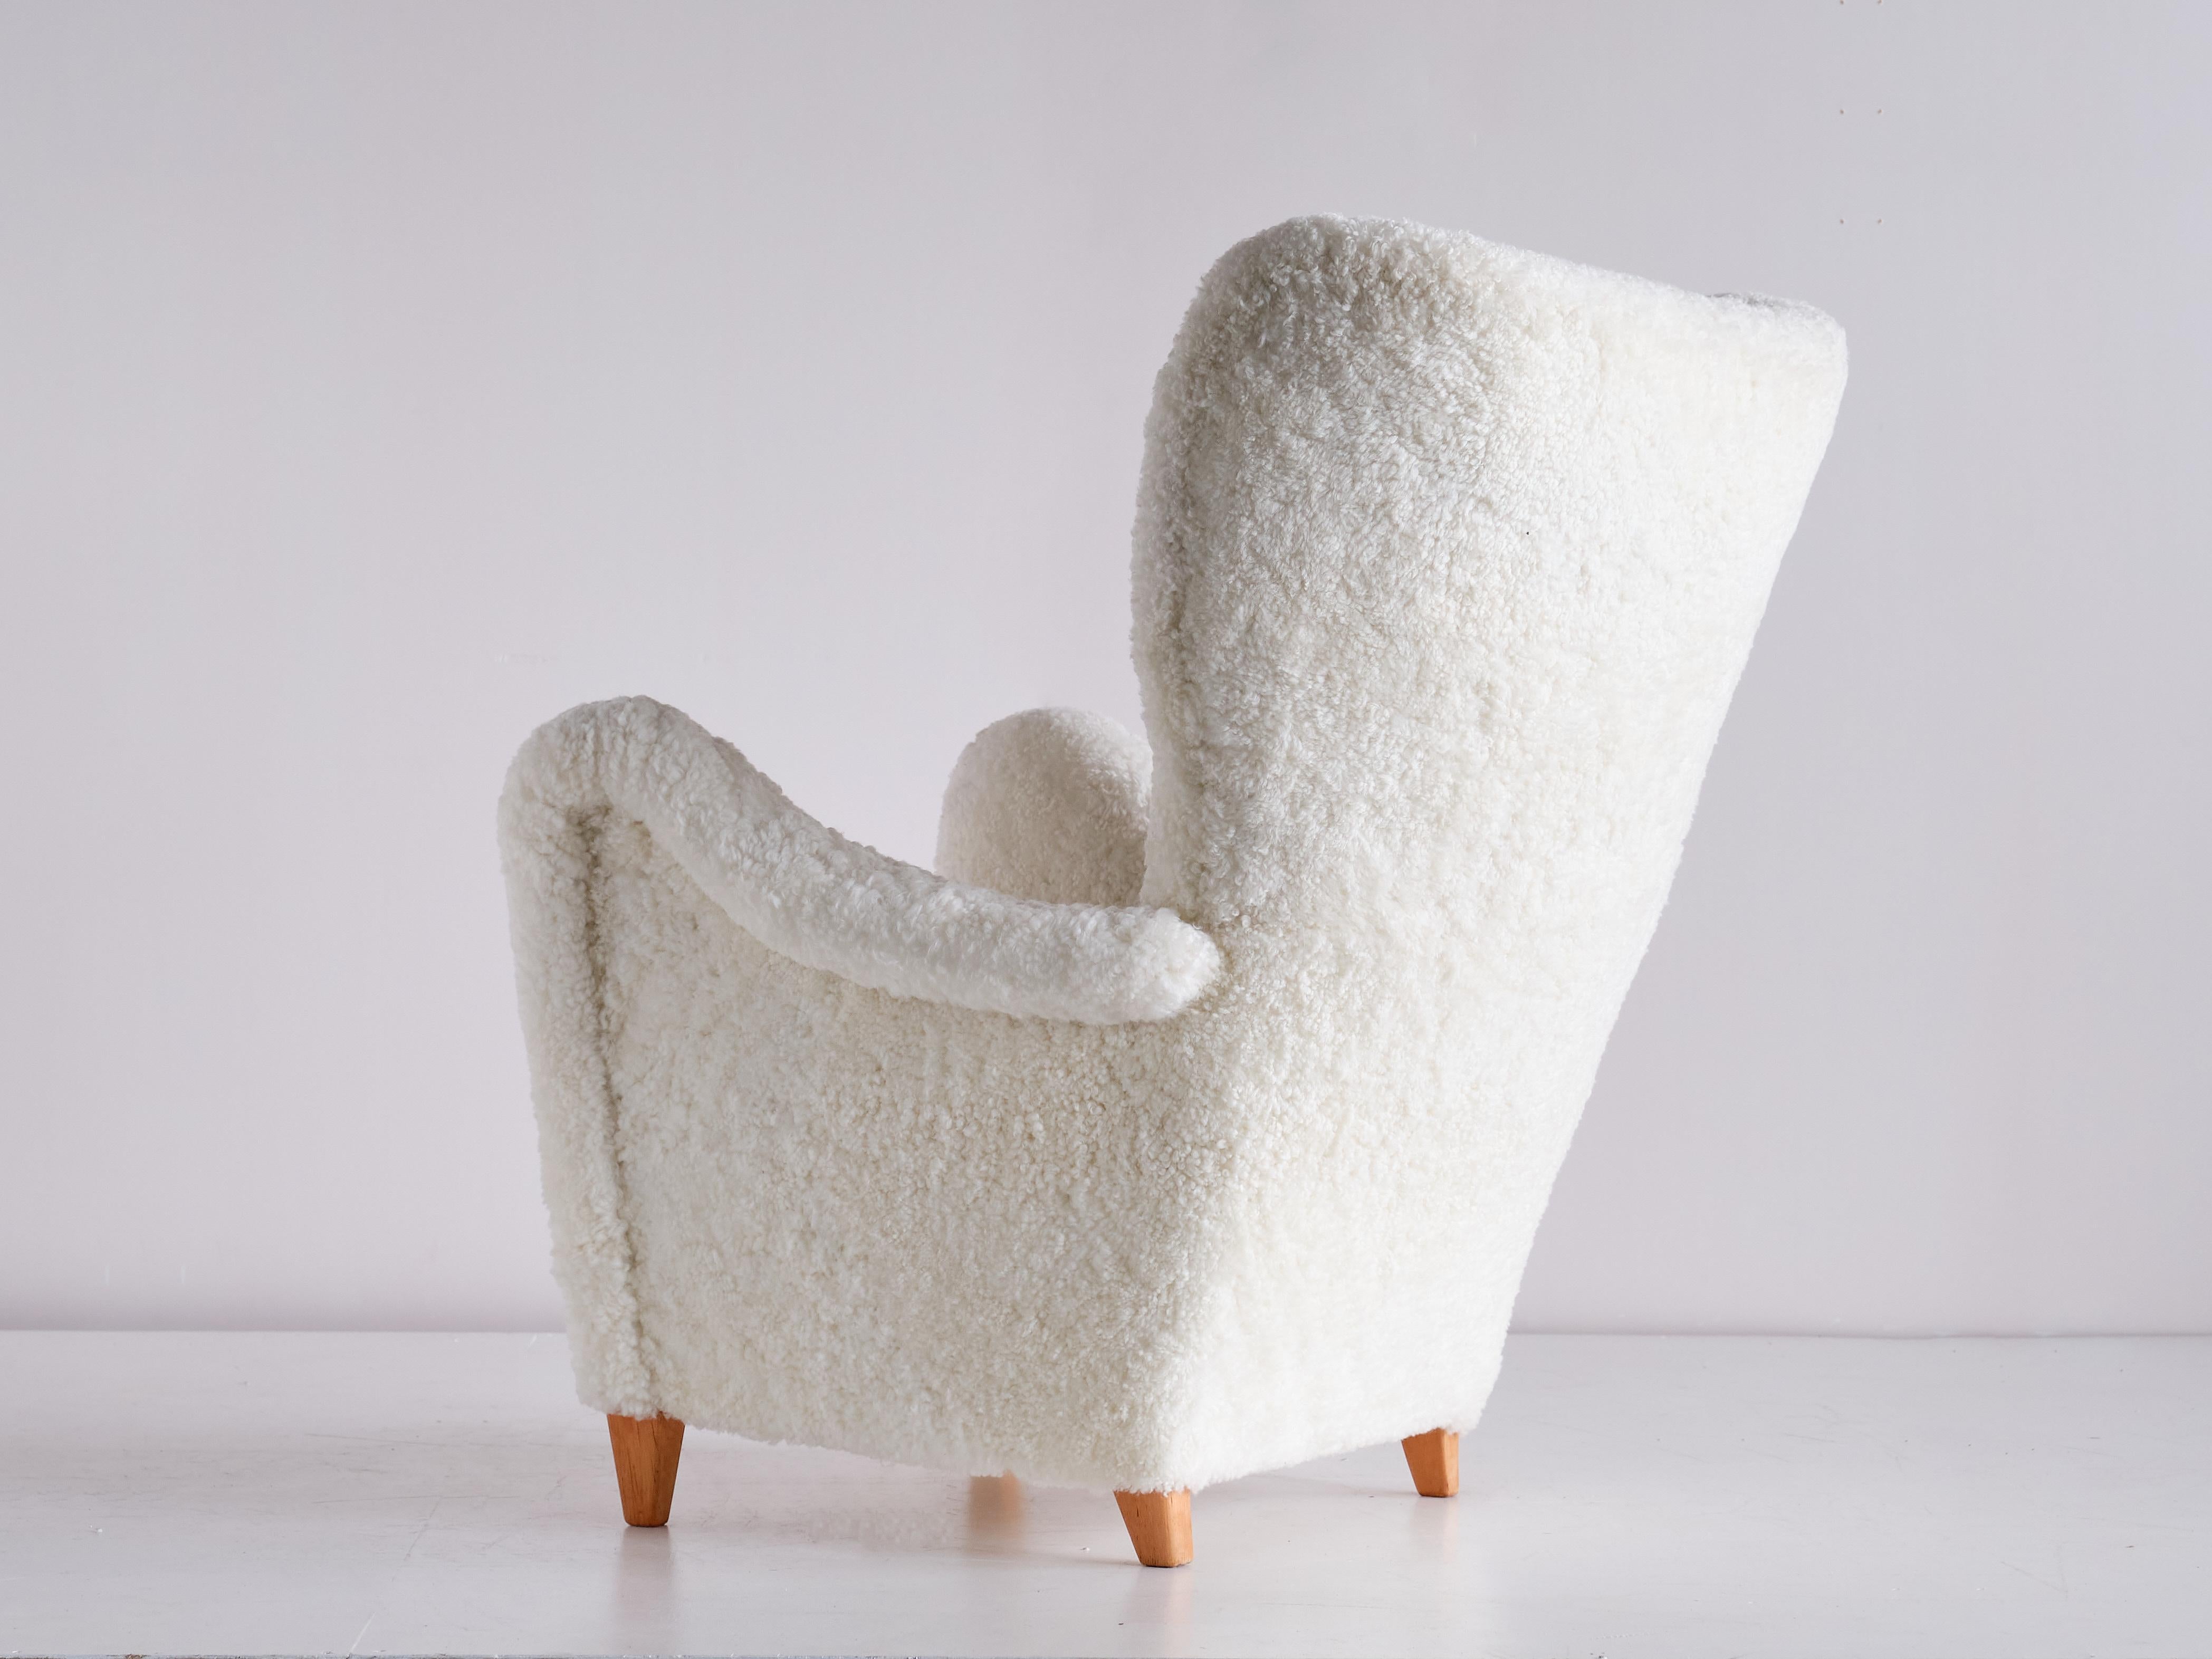 Otto Schulz Armchair in White Sheepskin and Beech, Boet, Sweden, 1940s For Sale 2